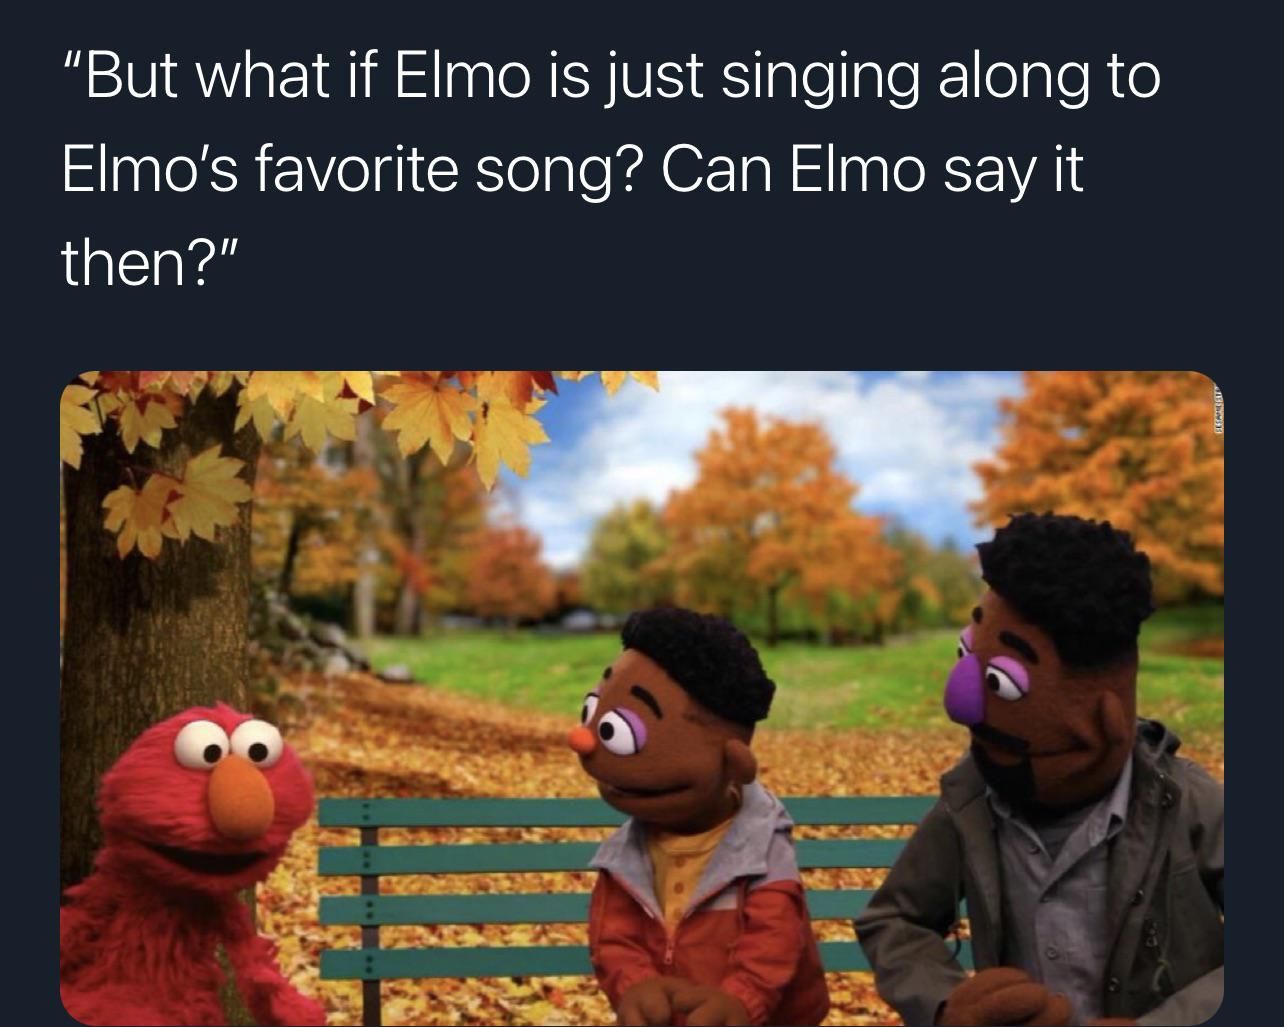 Can Elmo say it then?